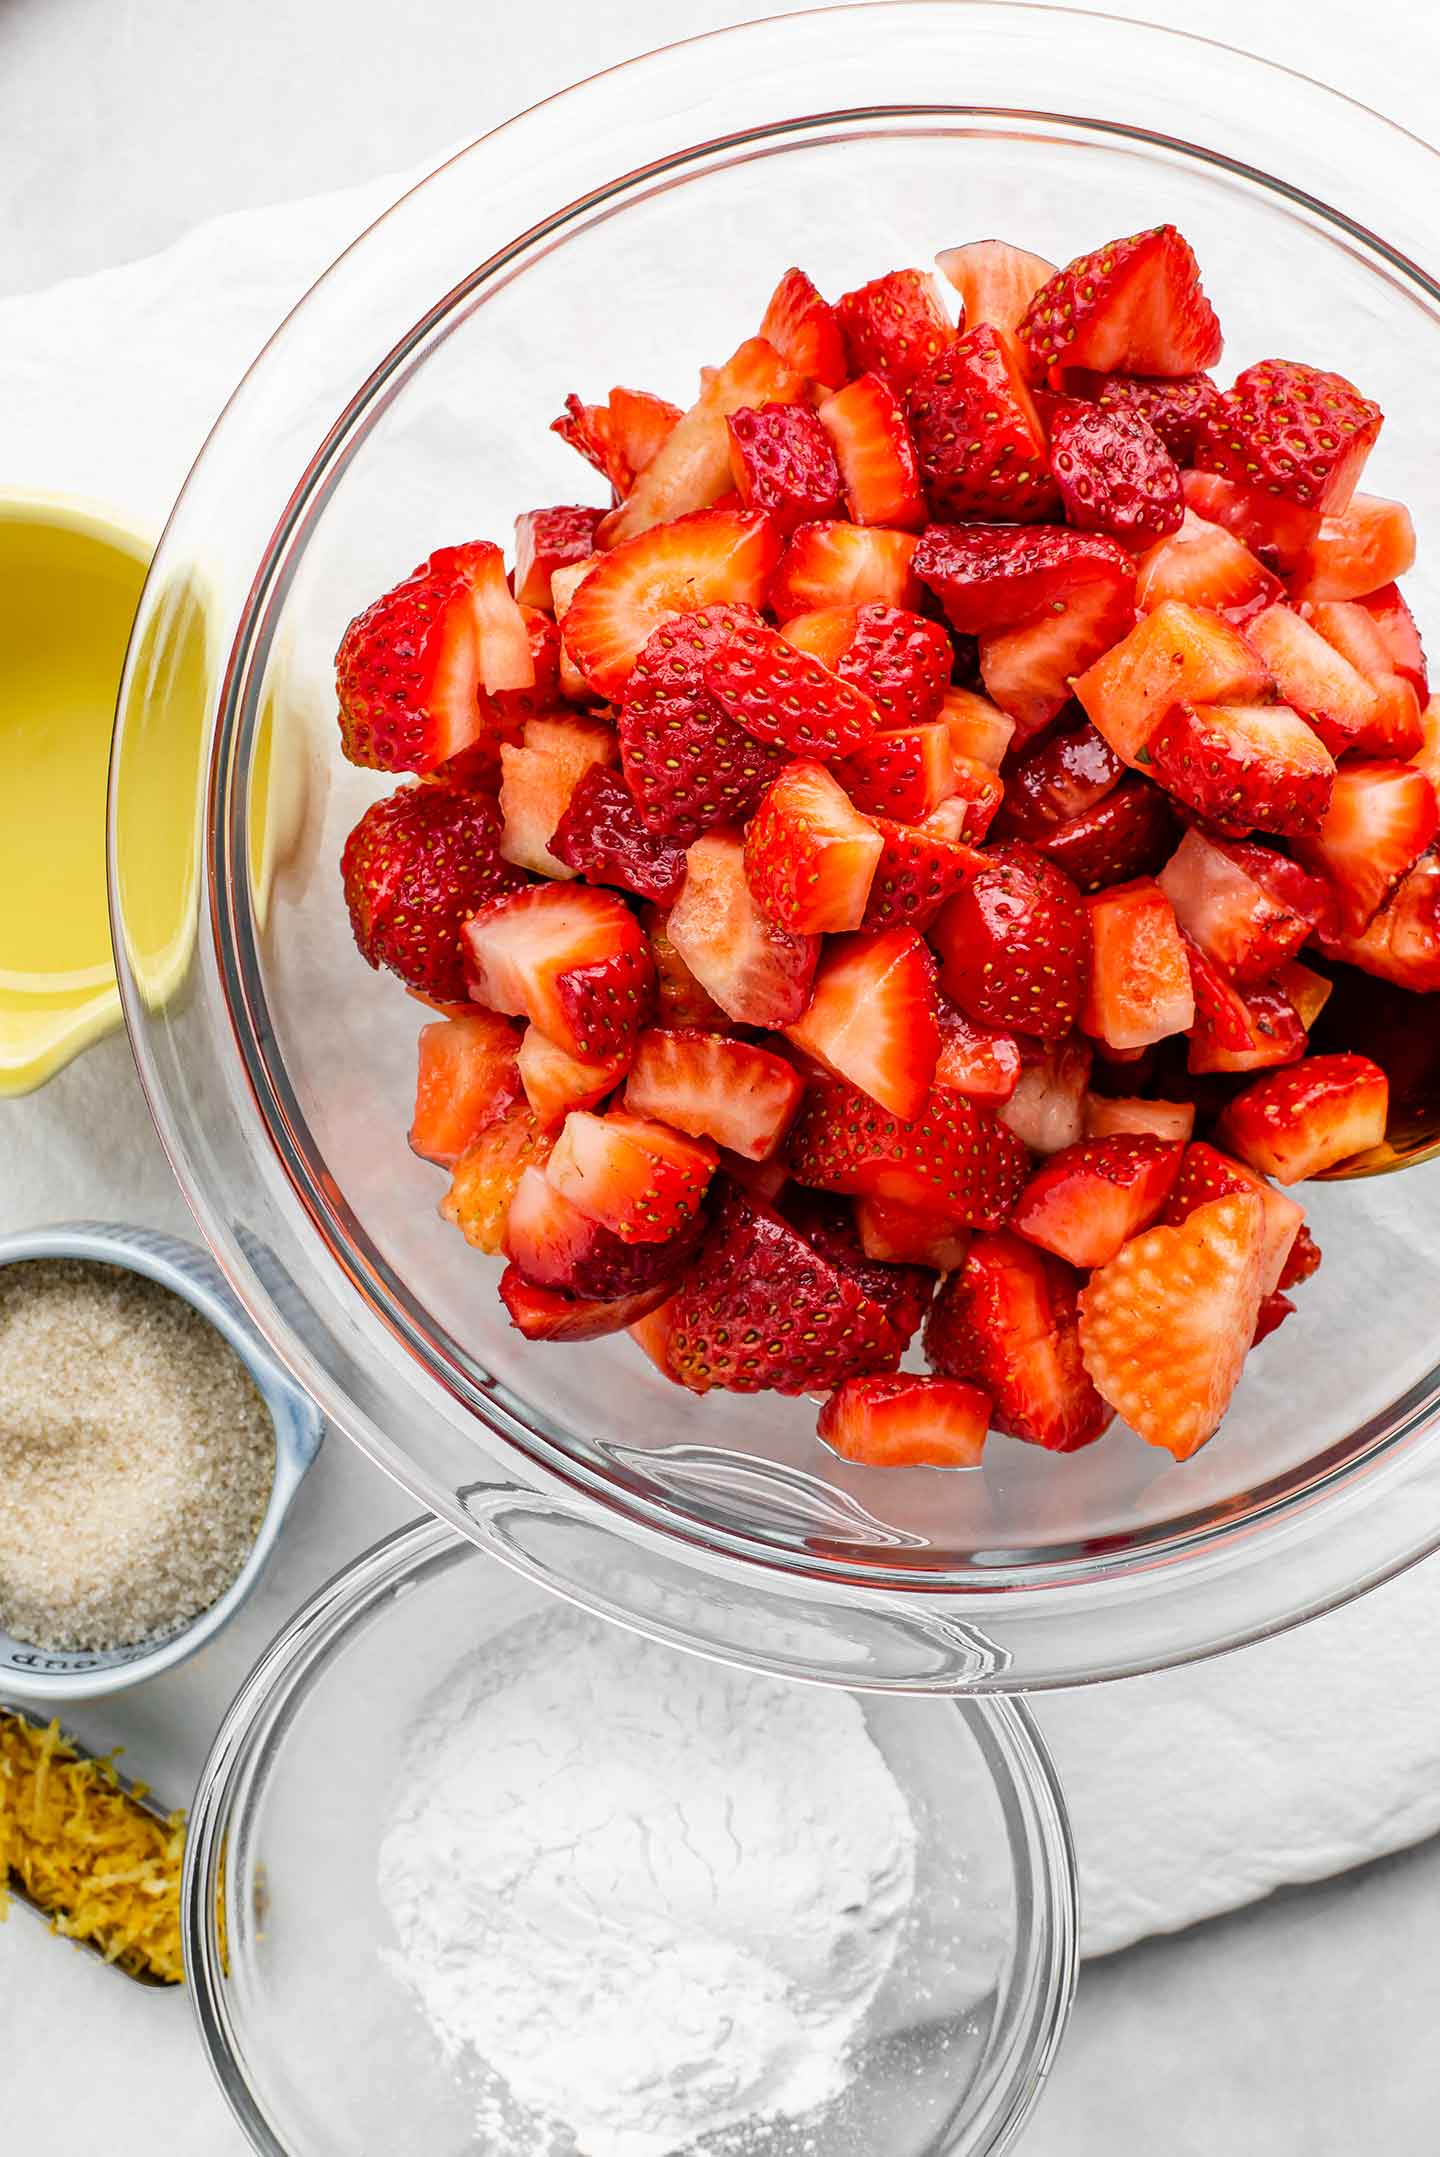 Top down view of diced strawberries in a glass bowl with lemon juice, cane sugar, lemon zest and arrowroot starch in separate dishes around the berries.